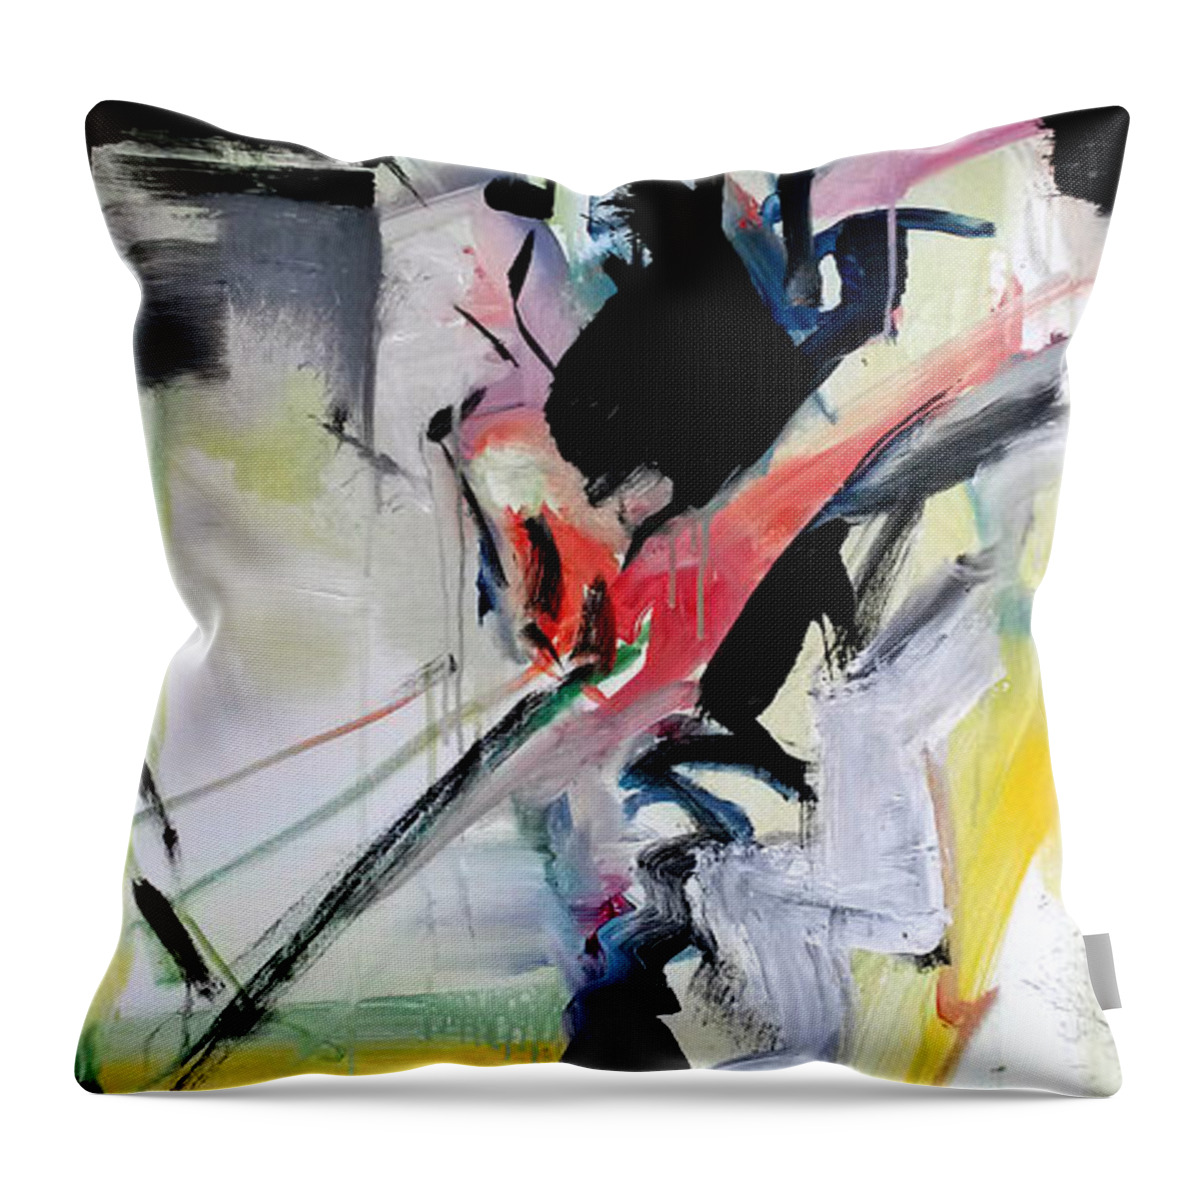  Throw Pillow featuring the painting Golf Pipe by John Gholson